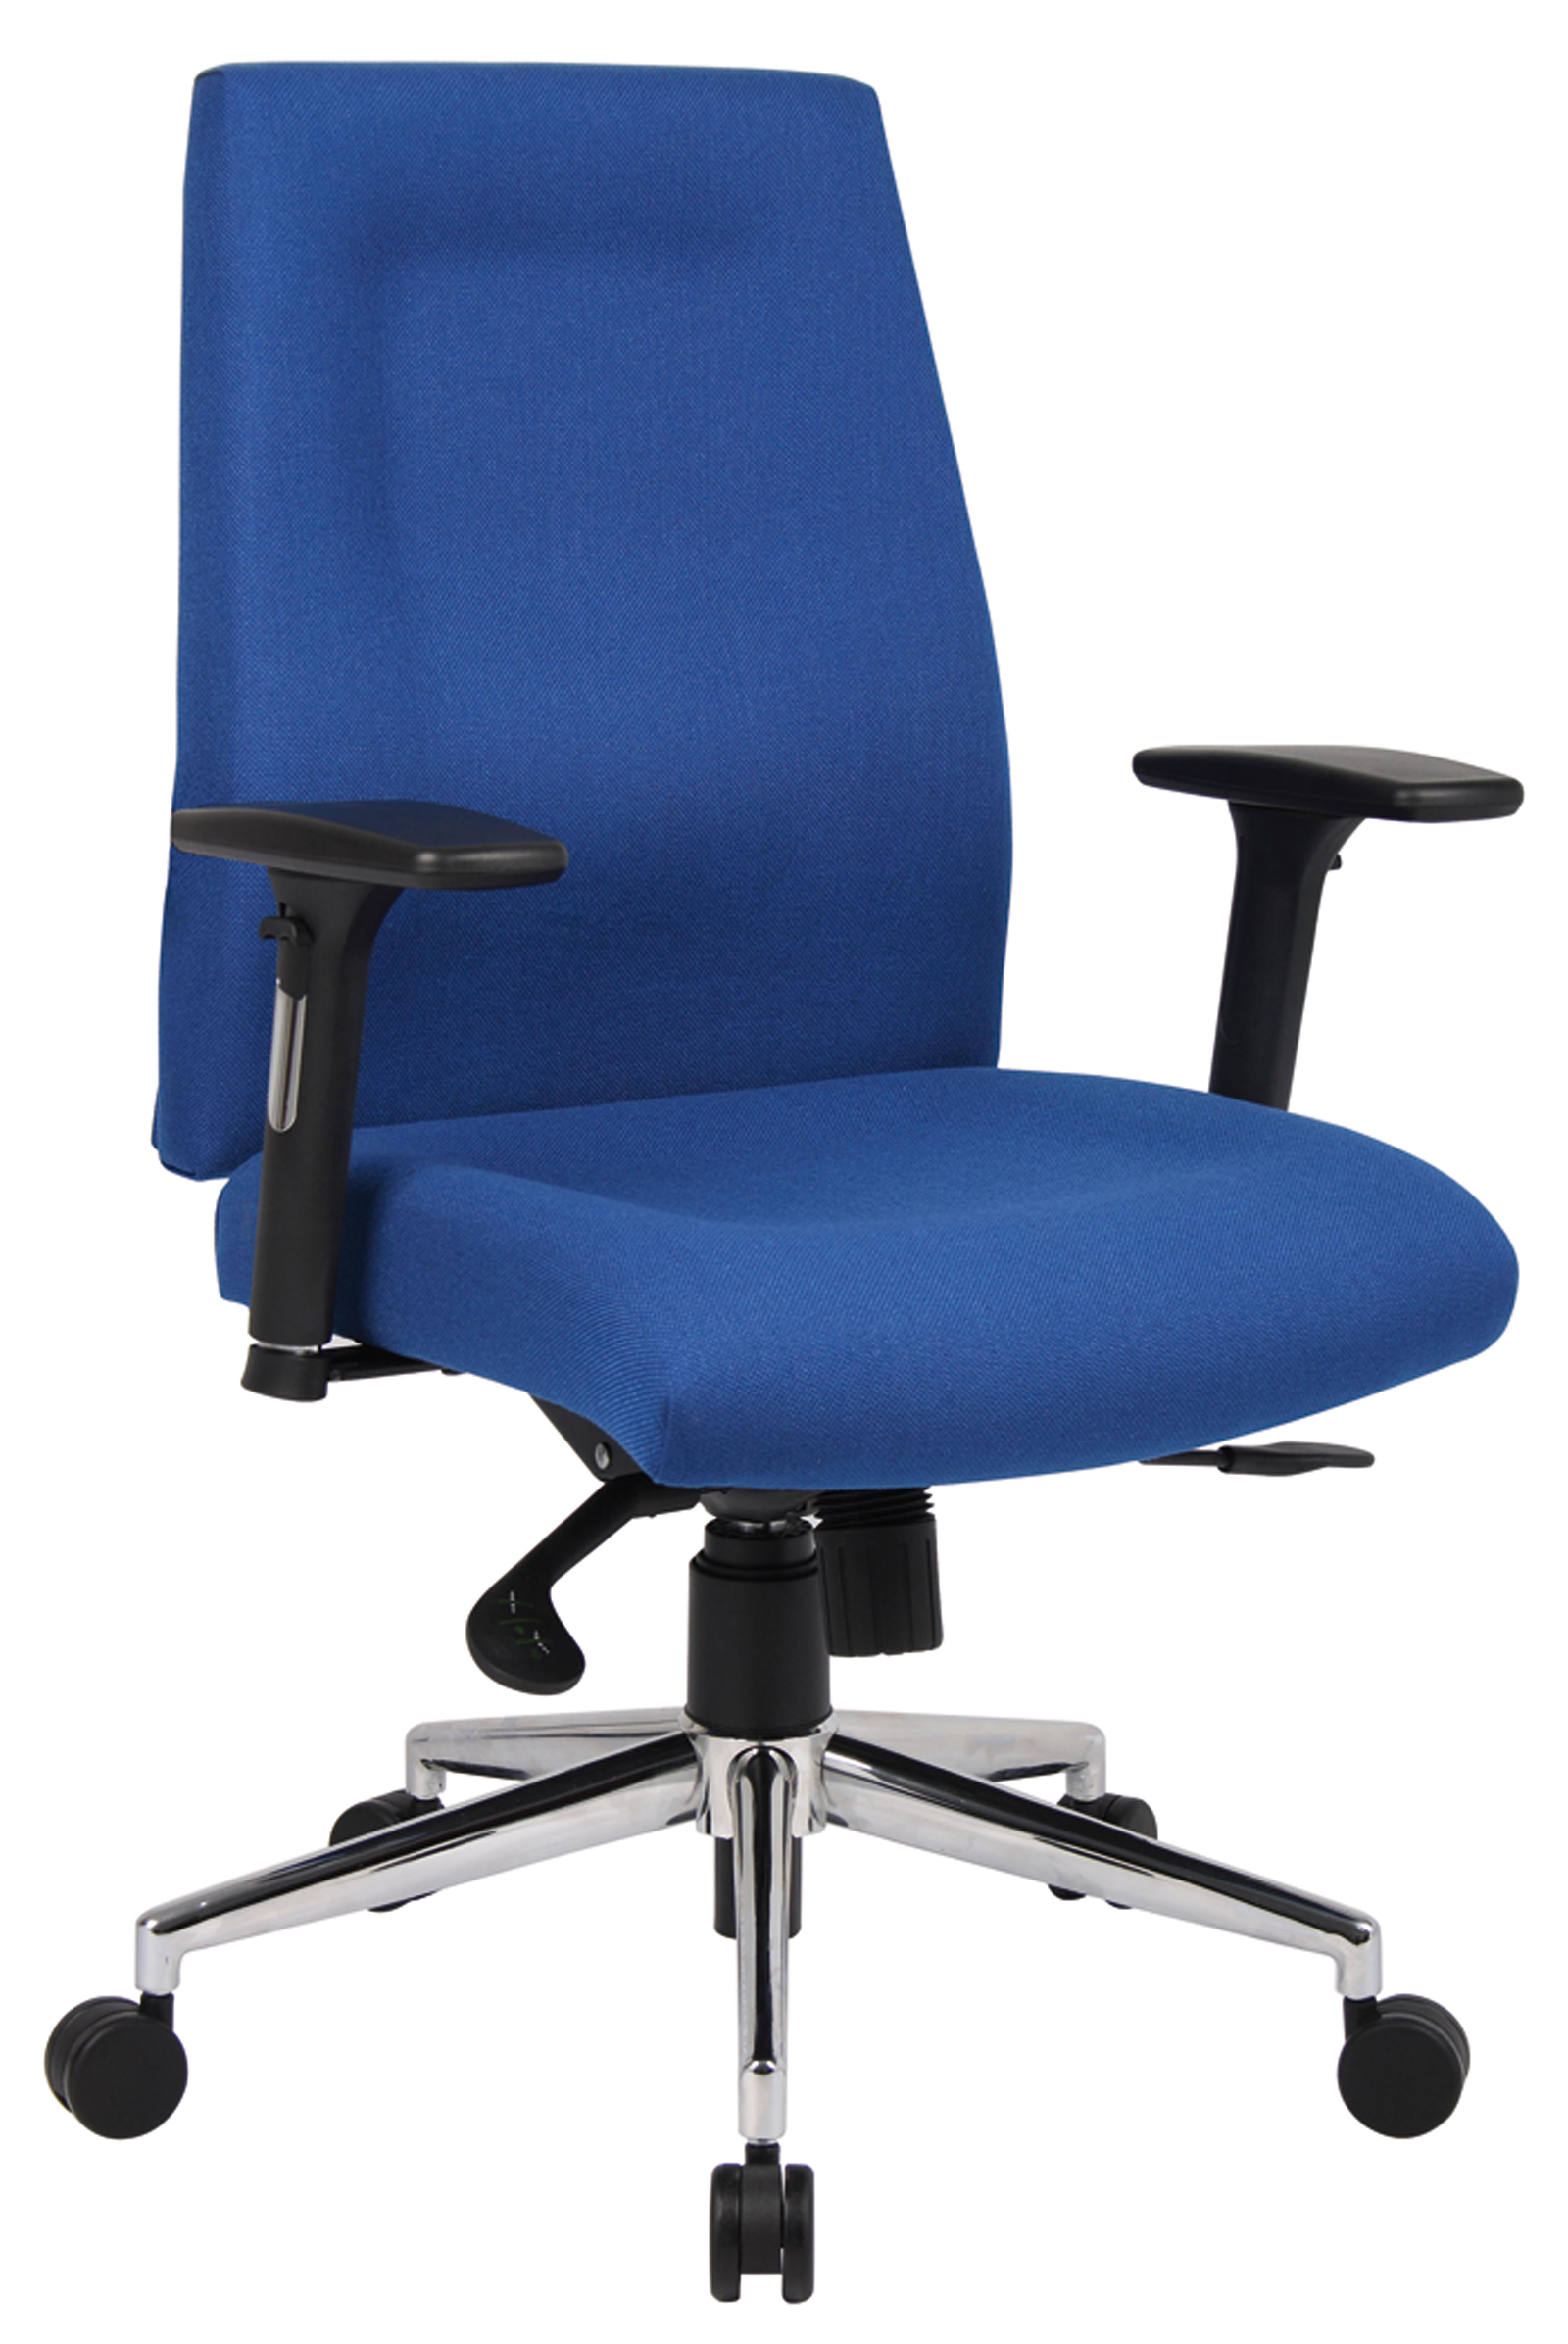 Orthopedic office chairs